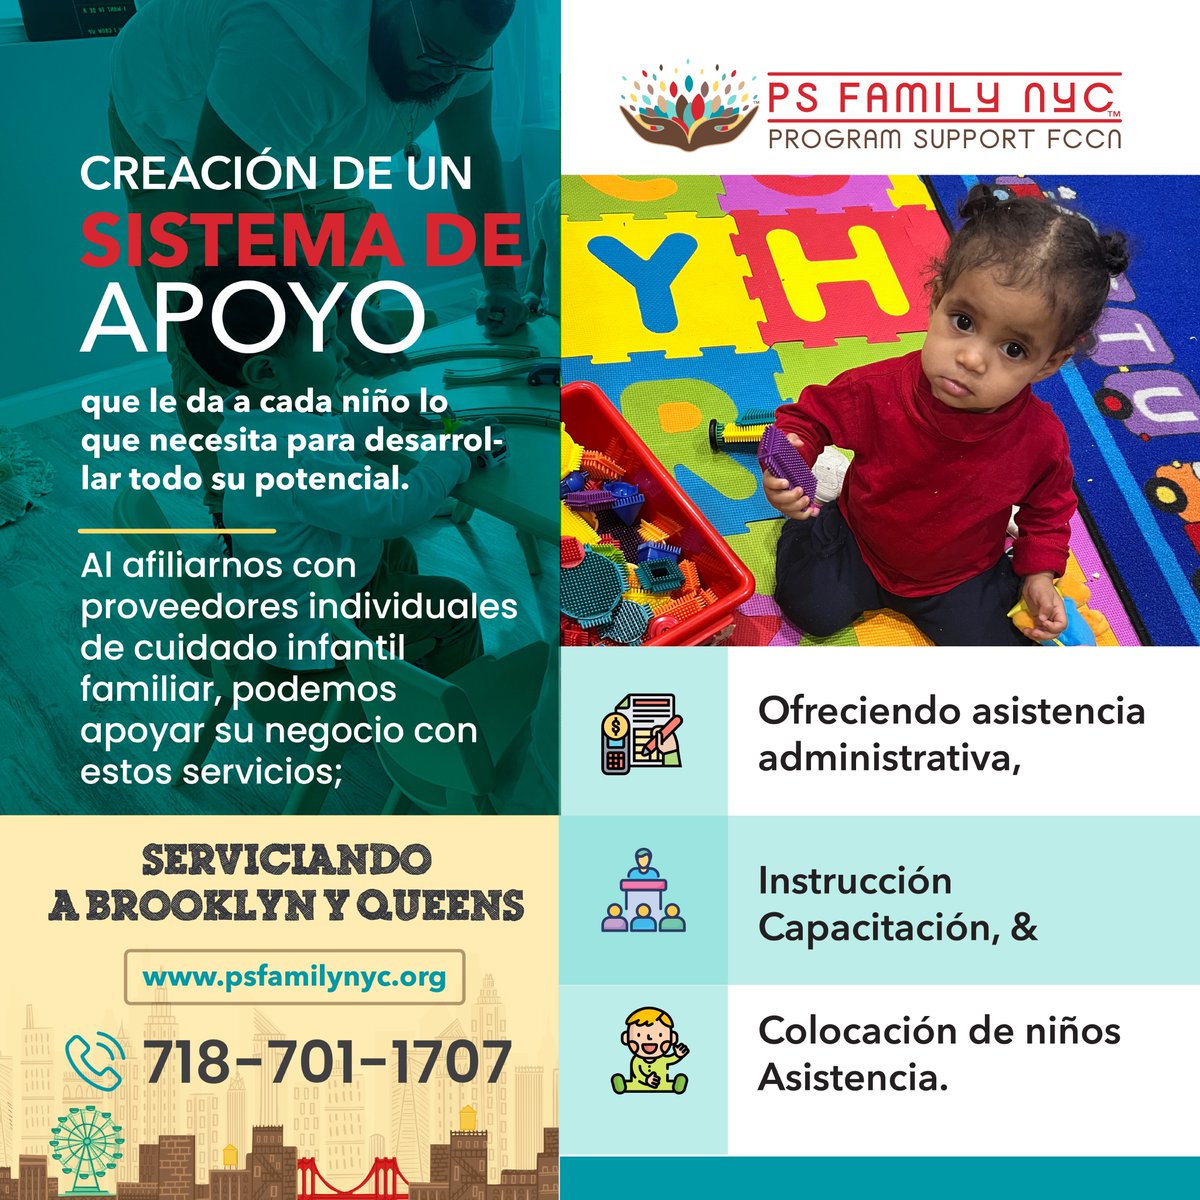 PS Family NYC trains child care providers and families to improve their business. Do you want to grow your child care business? Contact us to access the resources and support you need to succeed! #ChildEmpowerment #ChildCare #Resources #NYC